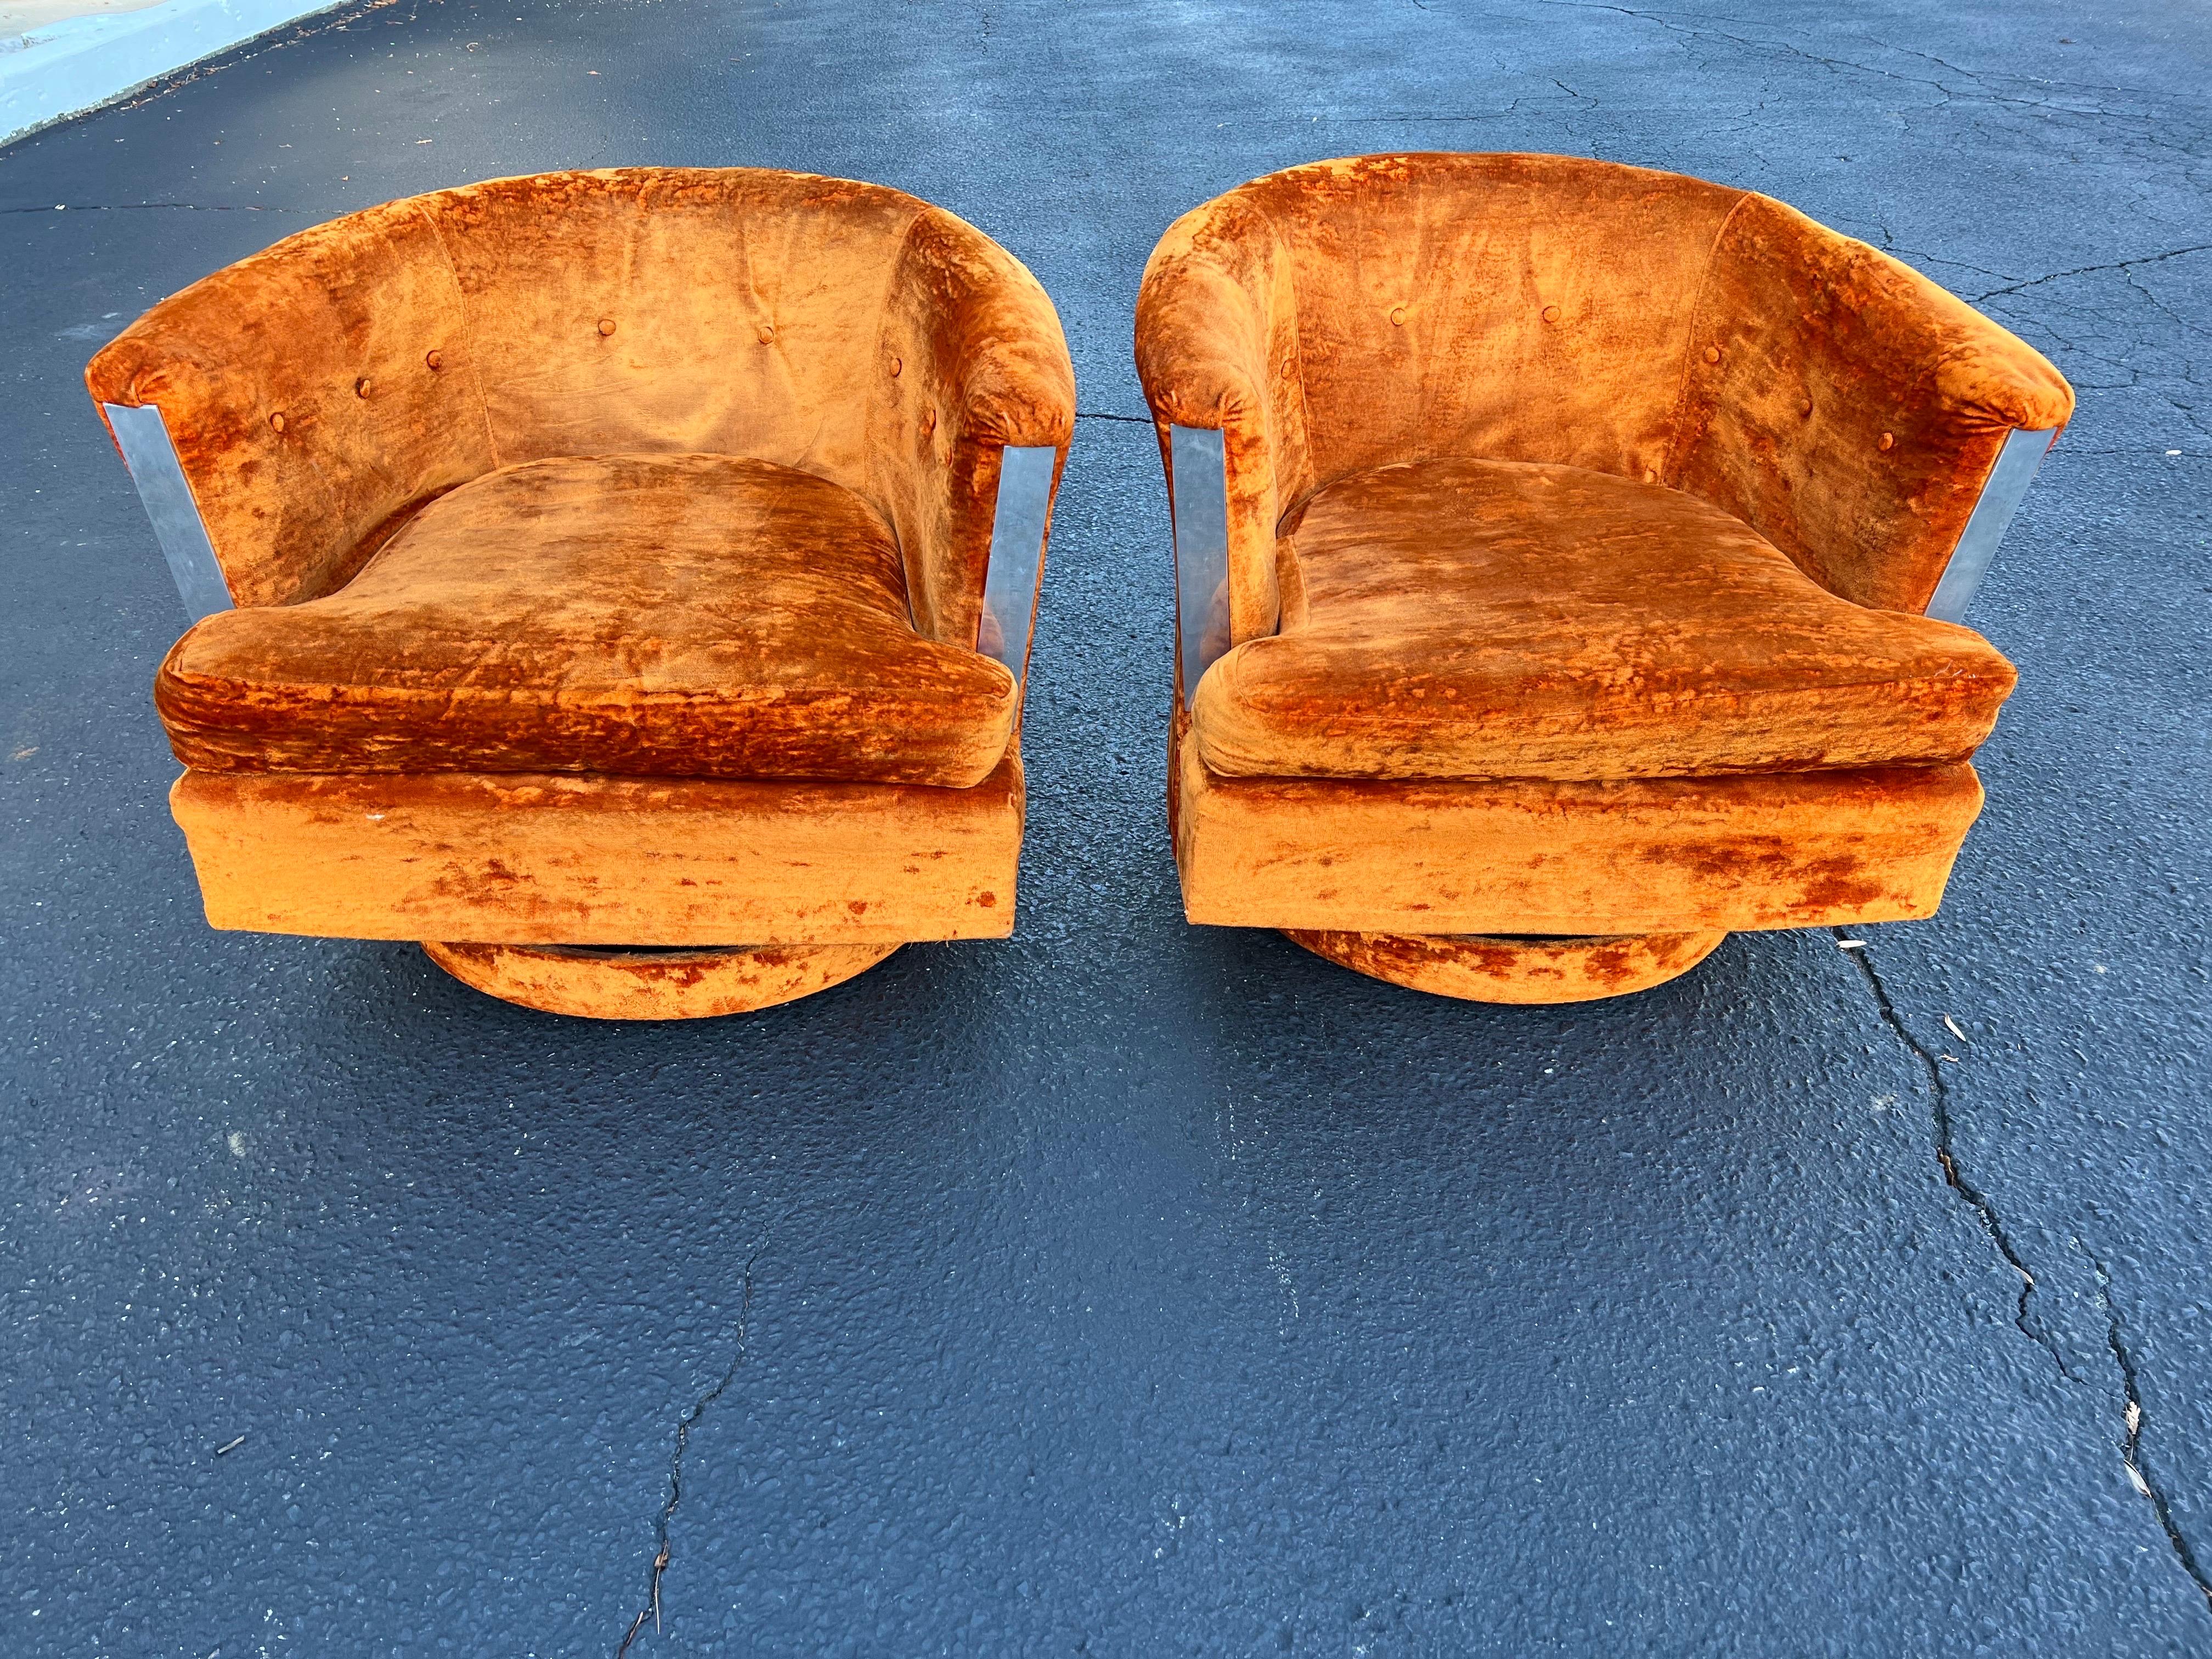 Pair of 1960’s Orange Crushed Velvet Swivel Chairs. Super mod pair of chairs with chrome trim on front. Groovy swivel pair by Singer. Perfect for that sunken living room with shag carpet. Perfect for a period piece for a set designer.